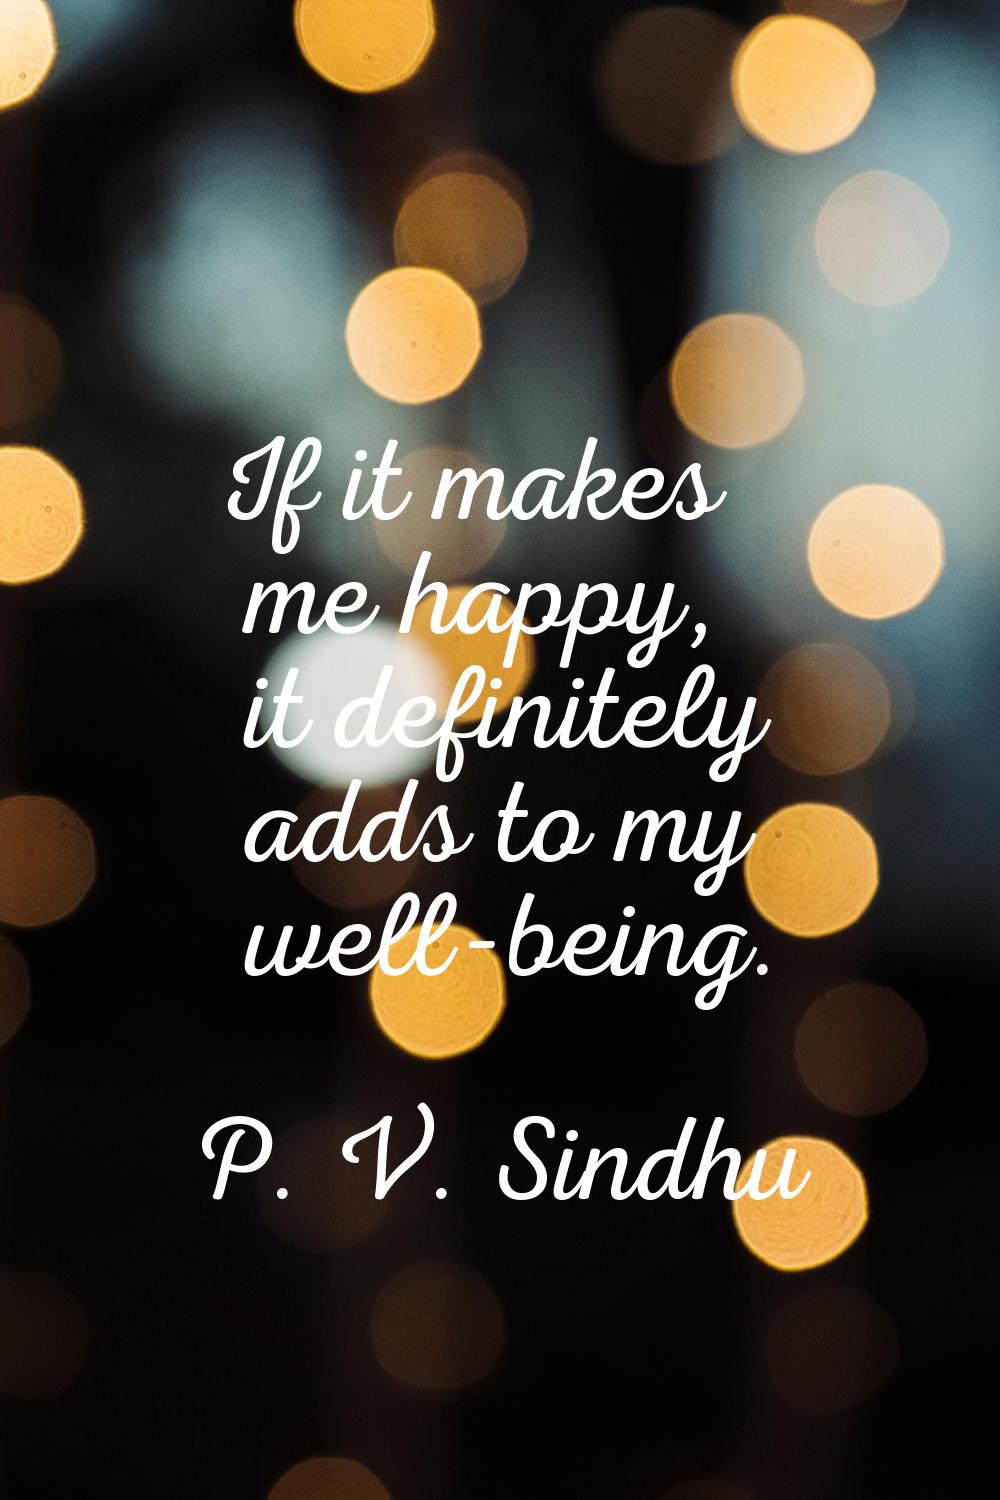 If it makes me happy, it definitely adds to my well-being.